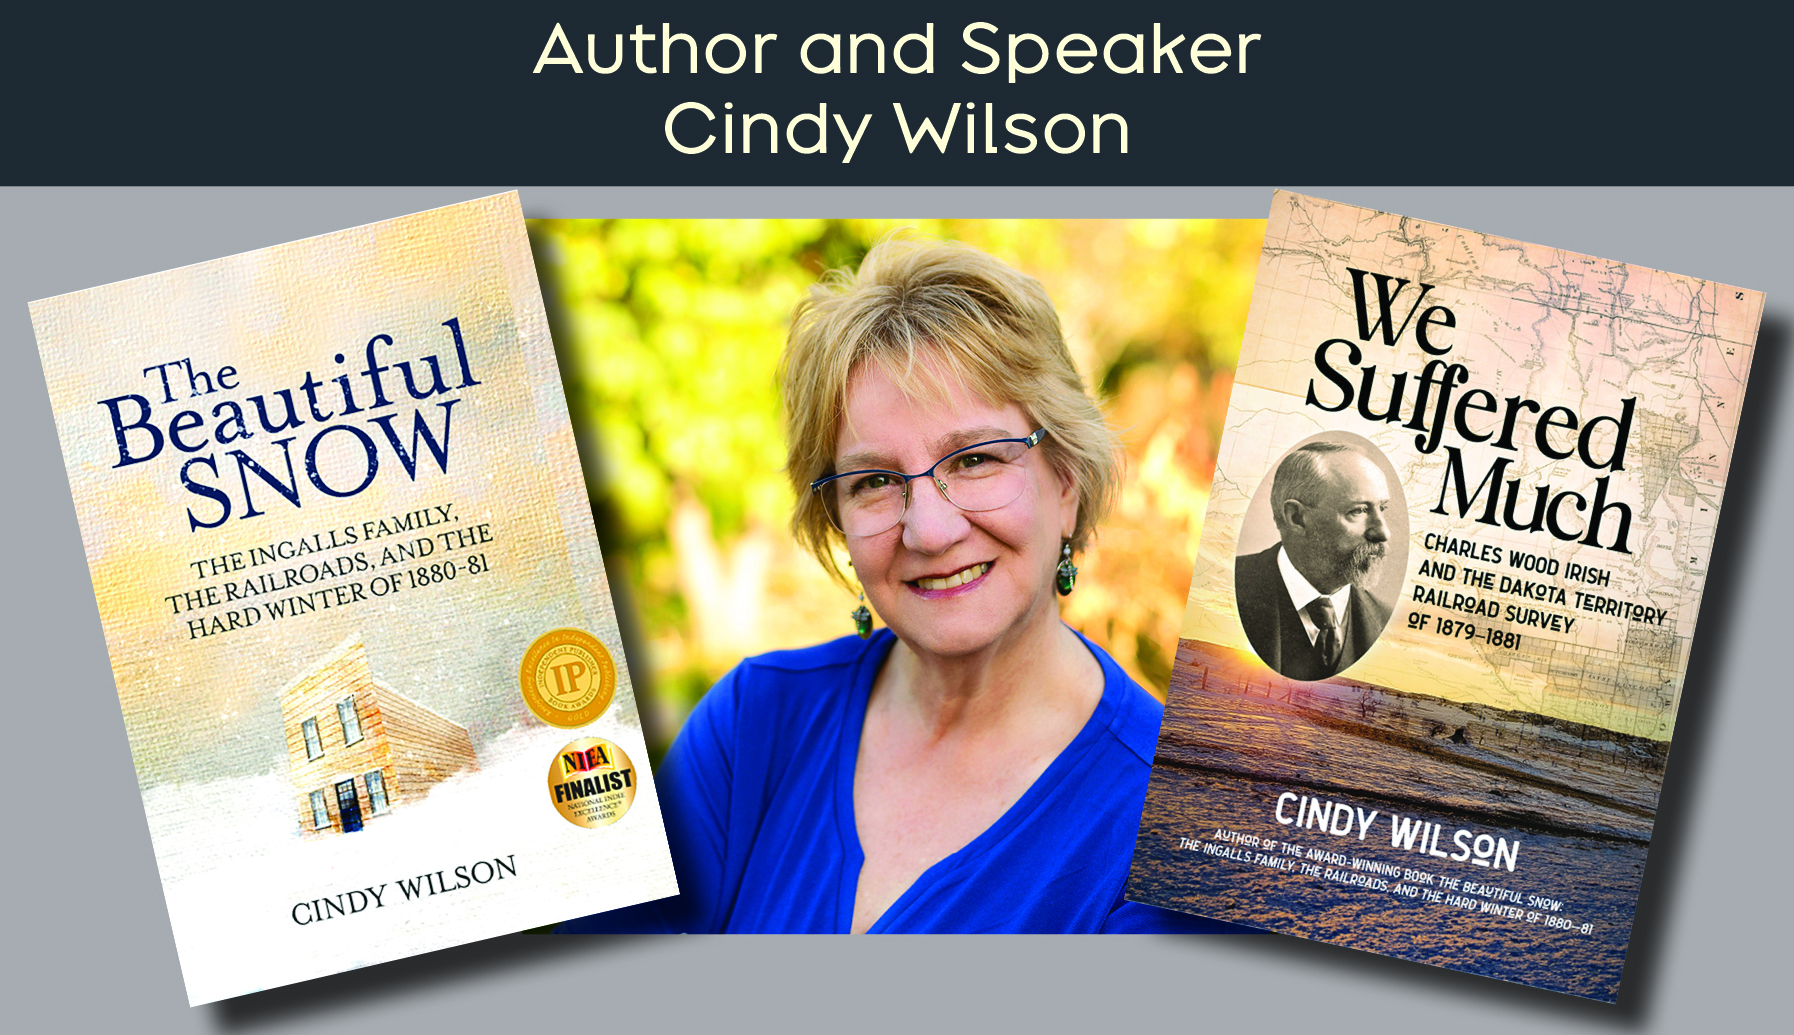 Author and Speaker Cindy Wilson